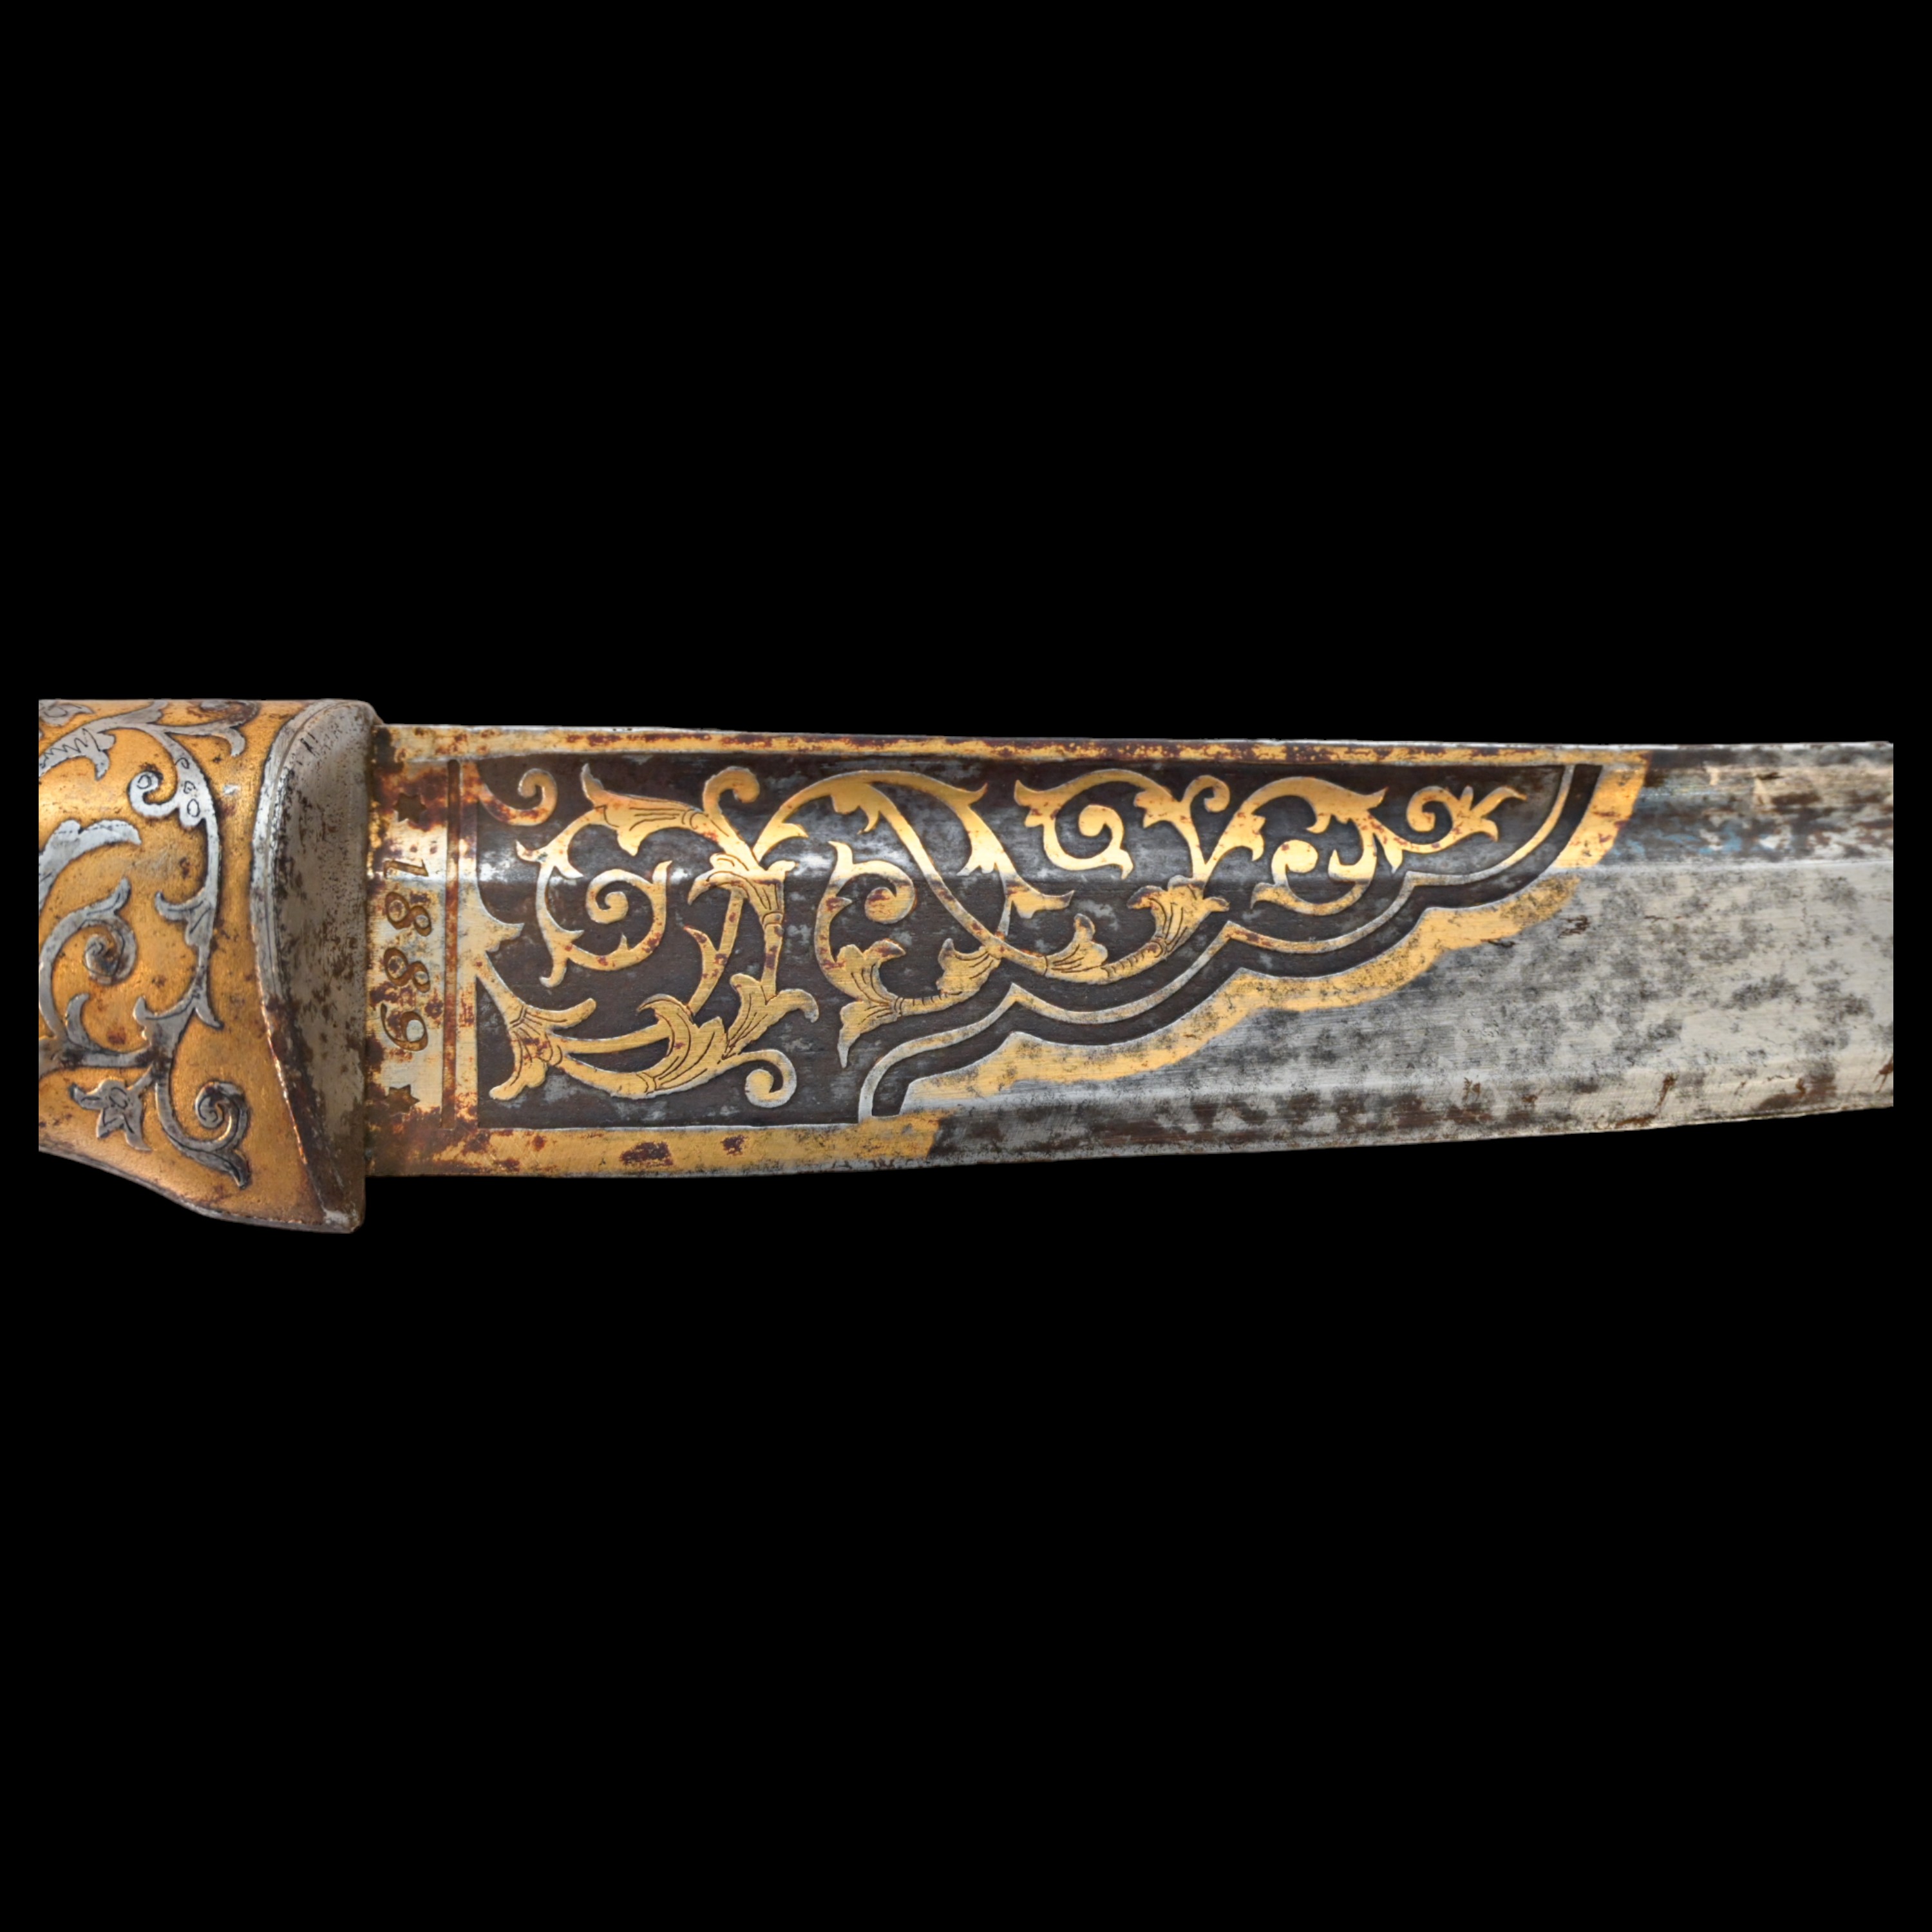 RARE HUNTING KNIFE, DECORATED WITH GOLD AND BLUE, RUSSIAN EMPIRE, ZLATOUST, 1889. - Image 11 of 26